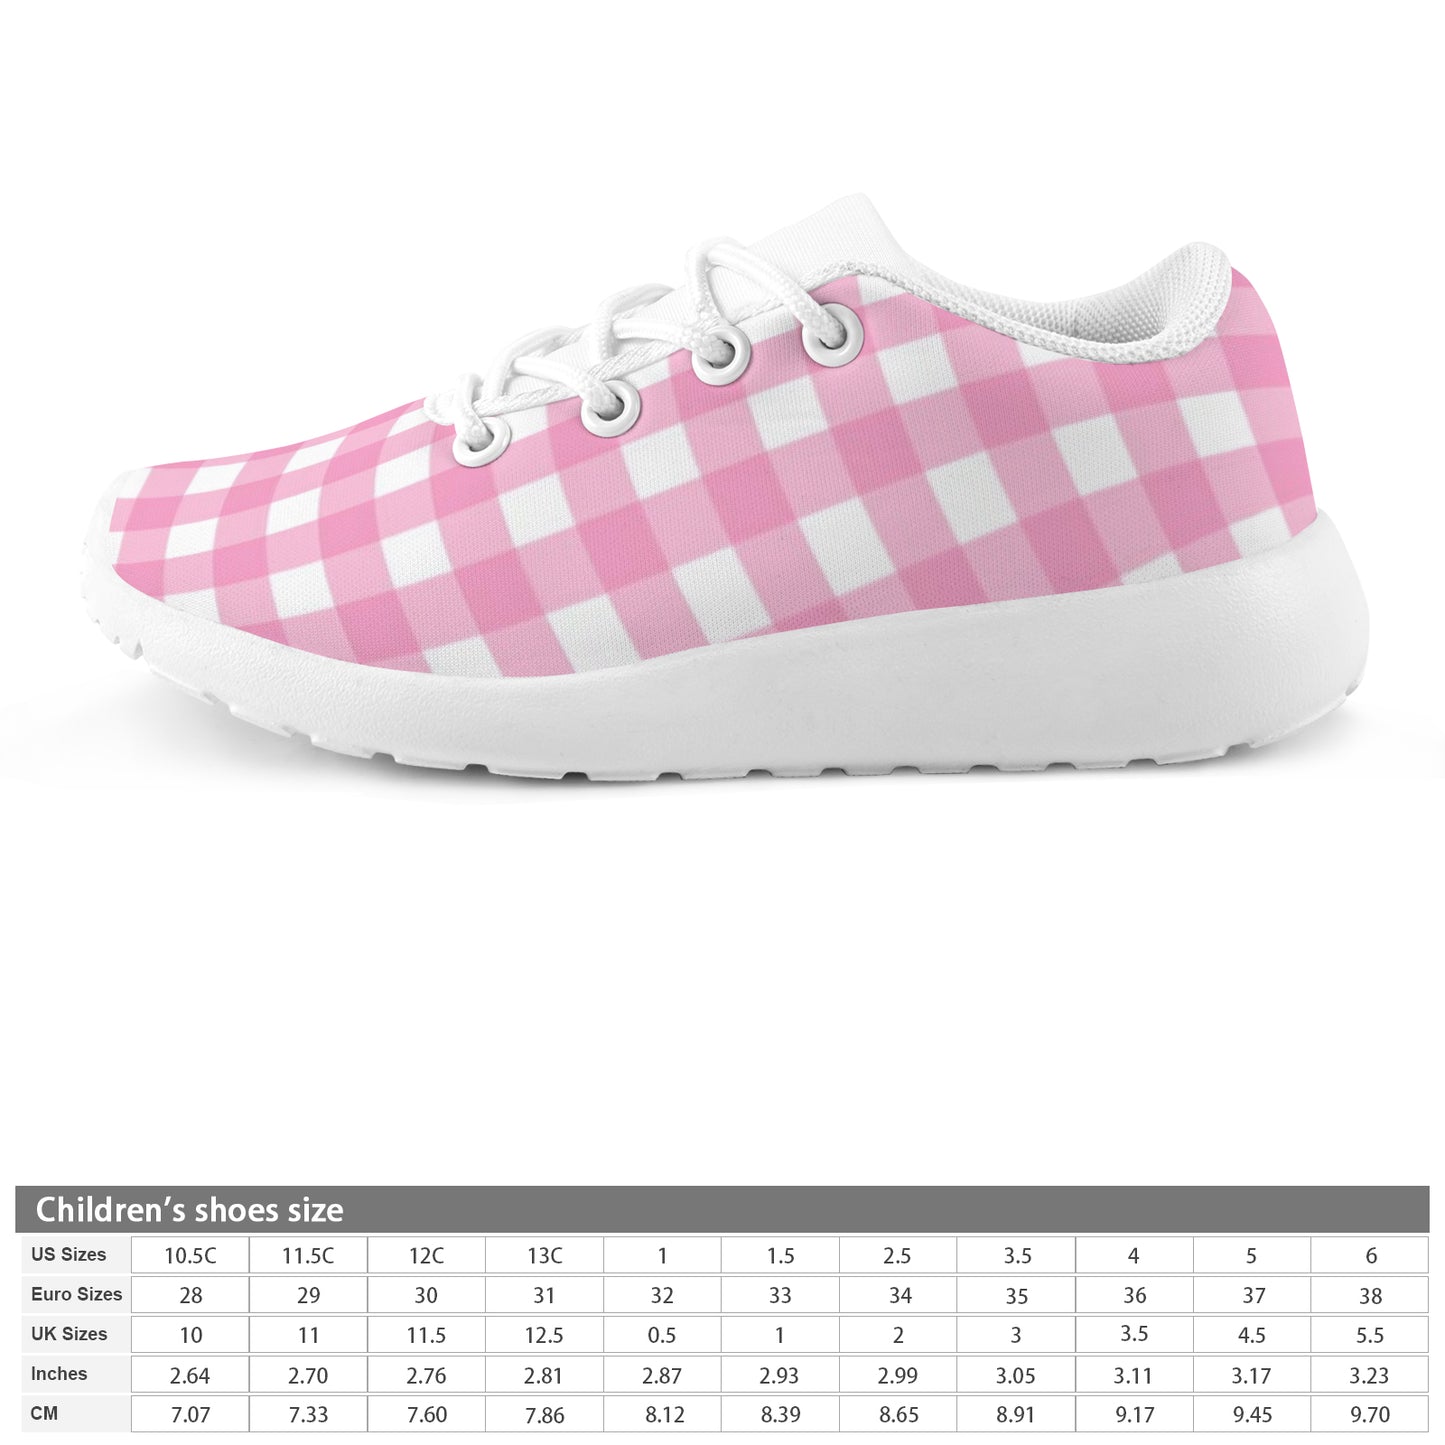 Kid's Sneakers - Pink Checkers